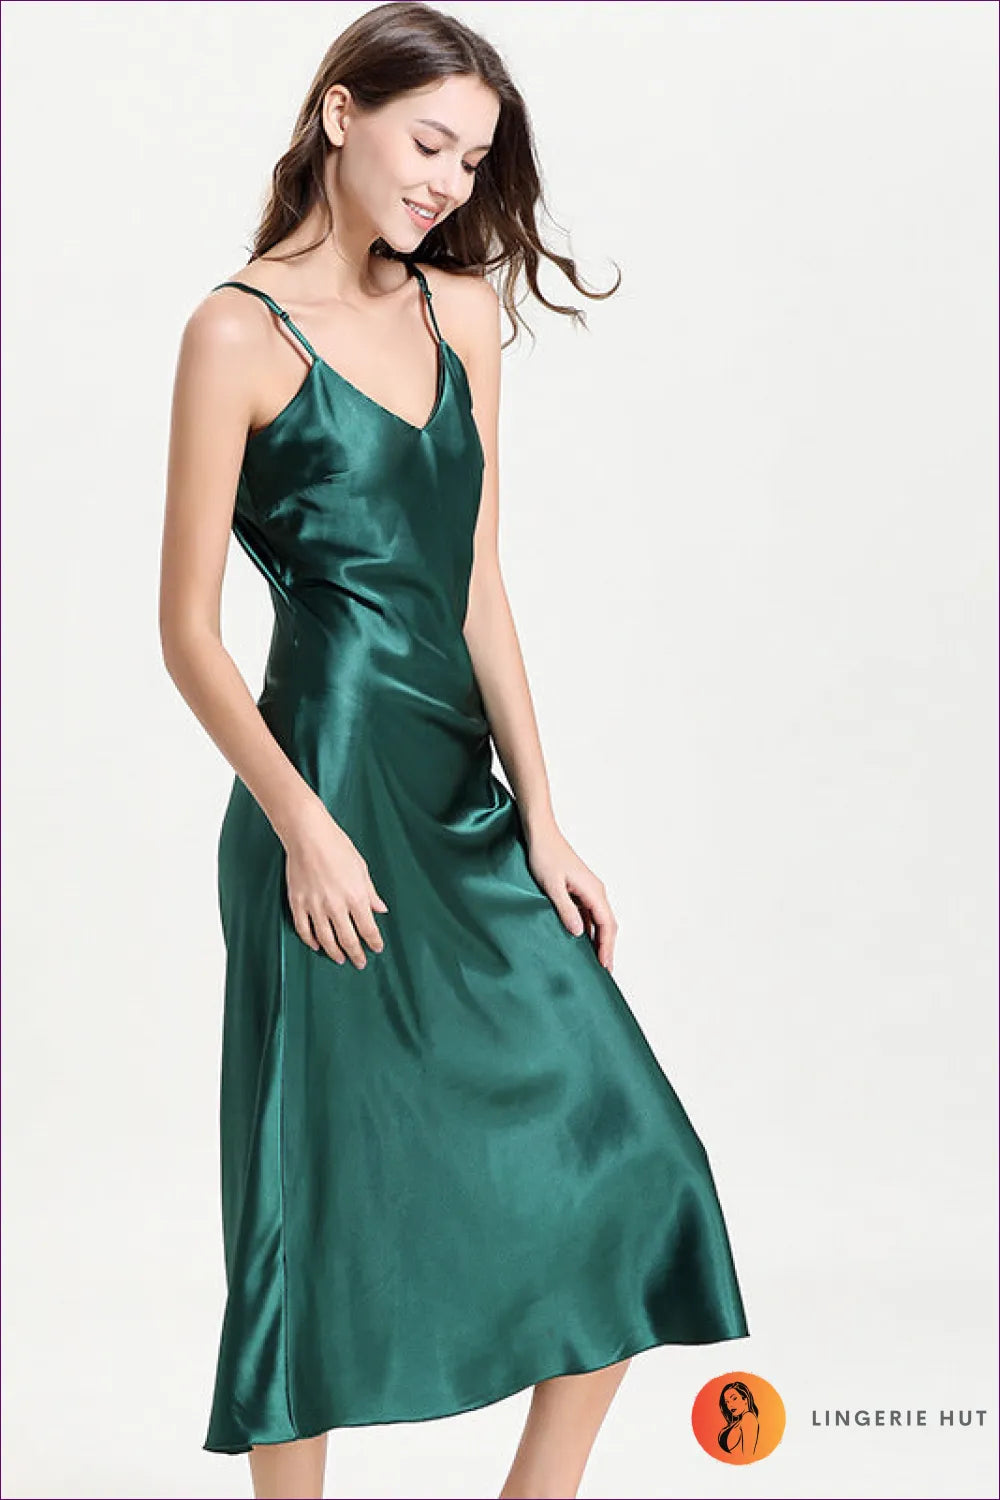 Slip Into a World Of Comfort And Allure With Our Sultry Satin Nightdress. Designed Flattering V-neck Crafted